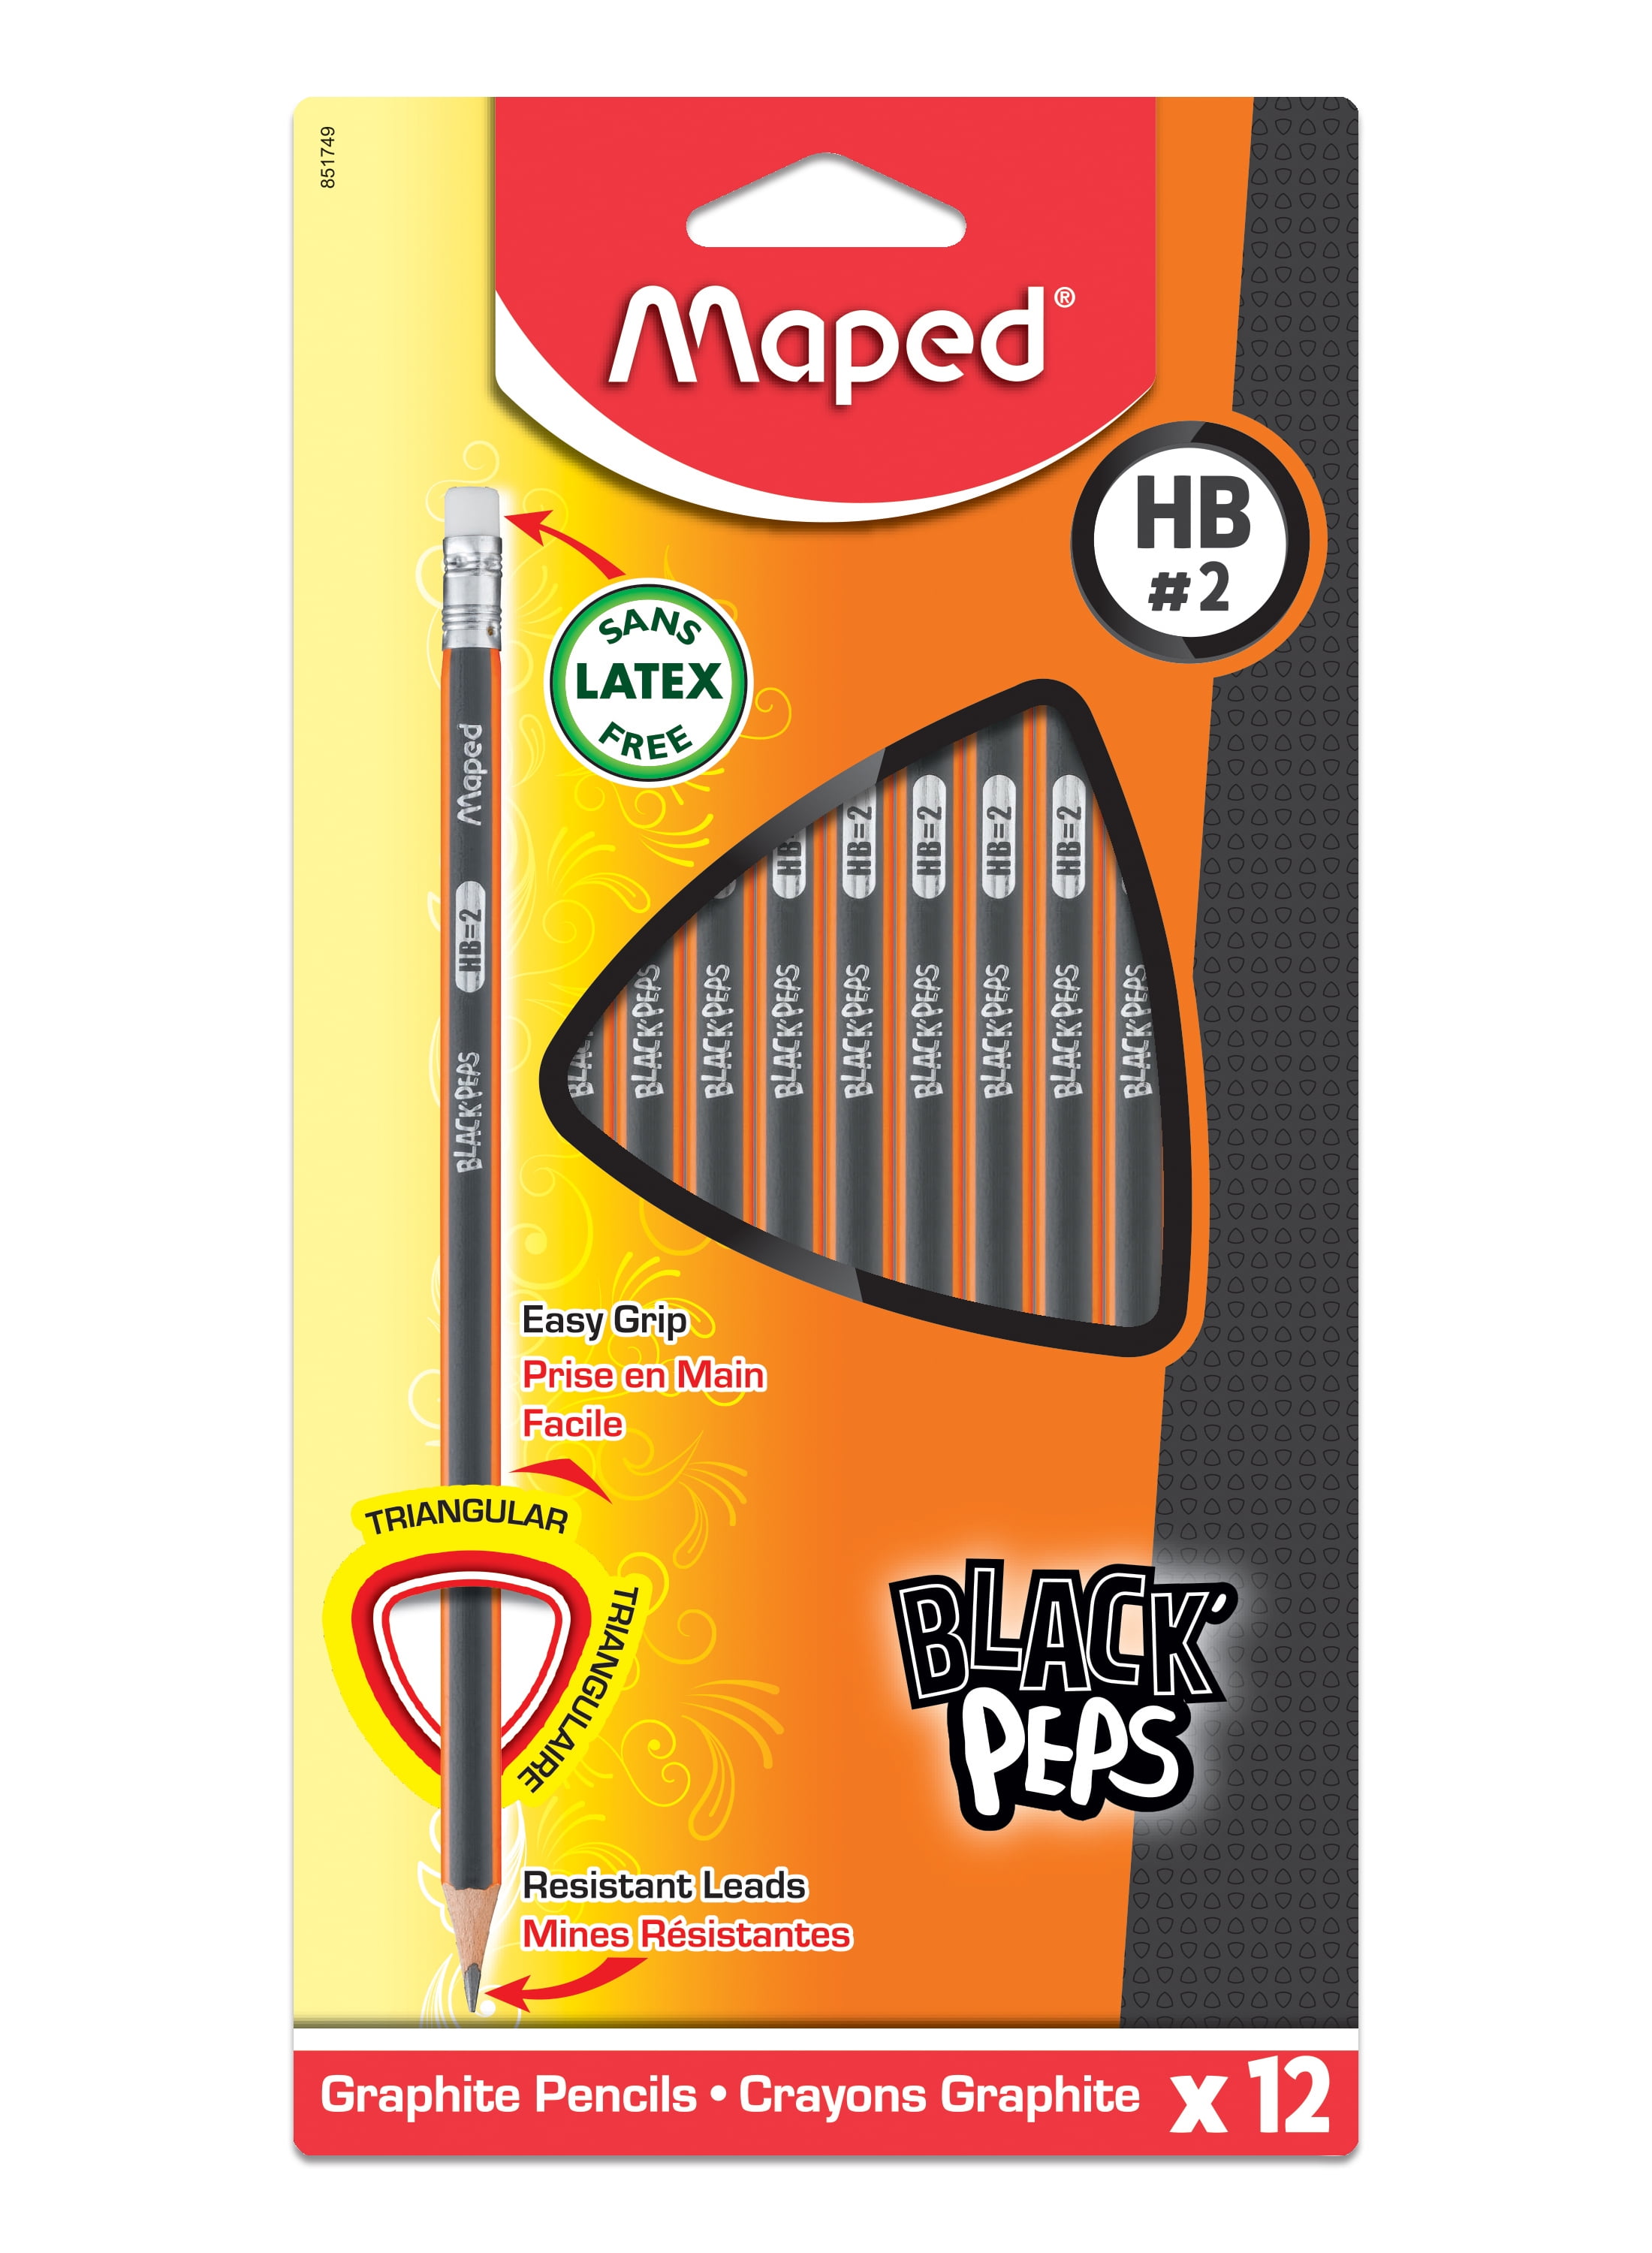 Maped BlackPeps HB Graphite Pencils Pack of 12 